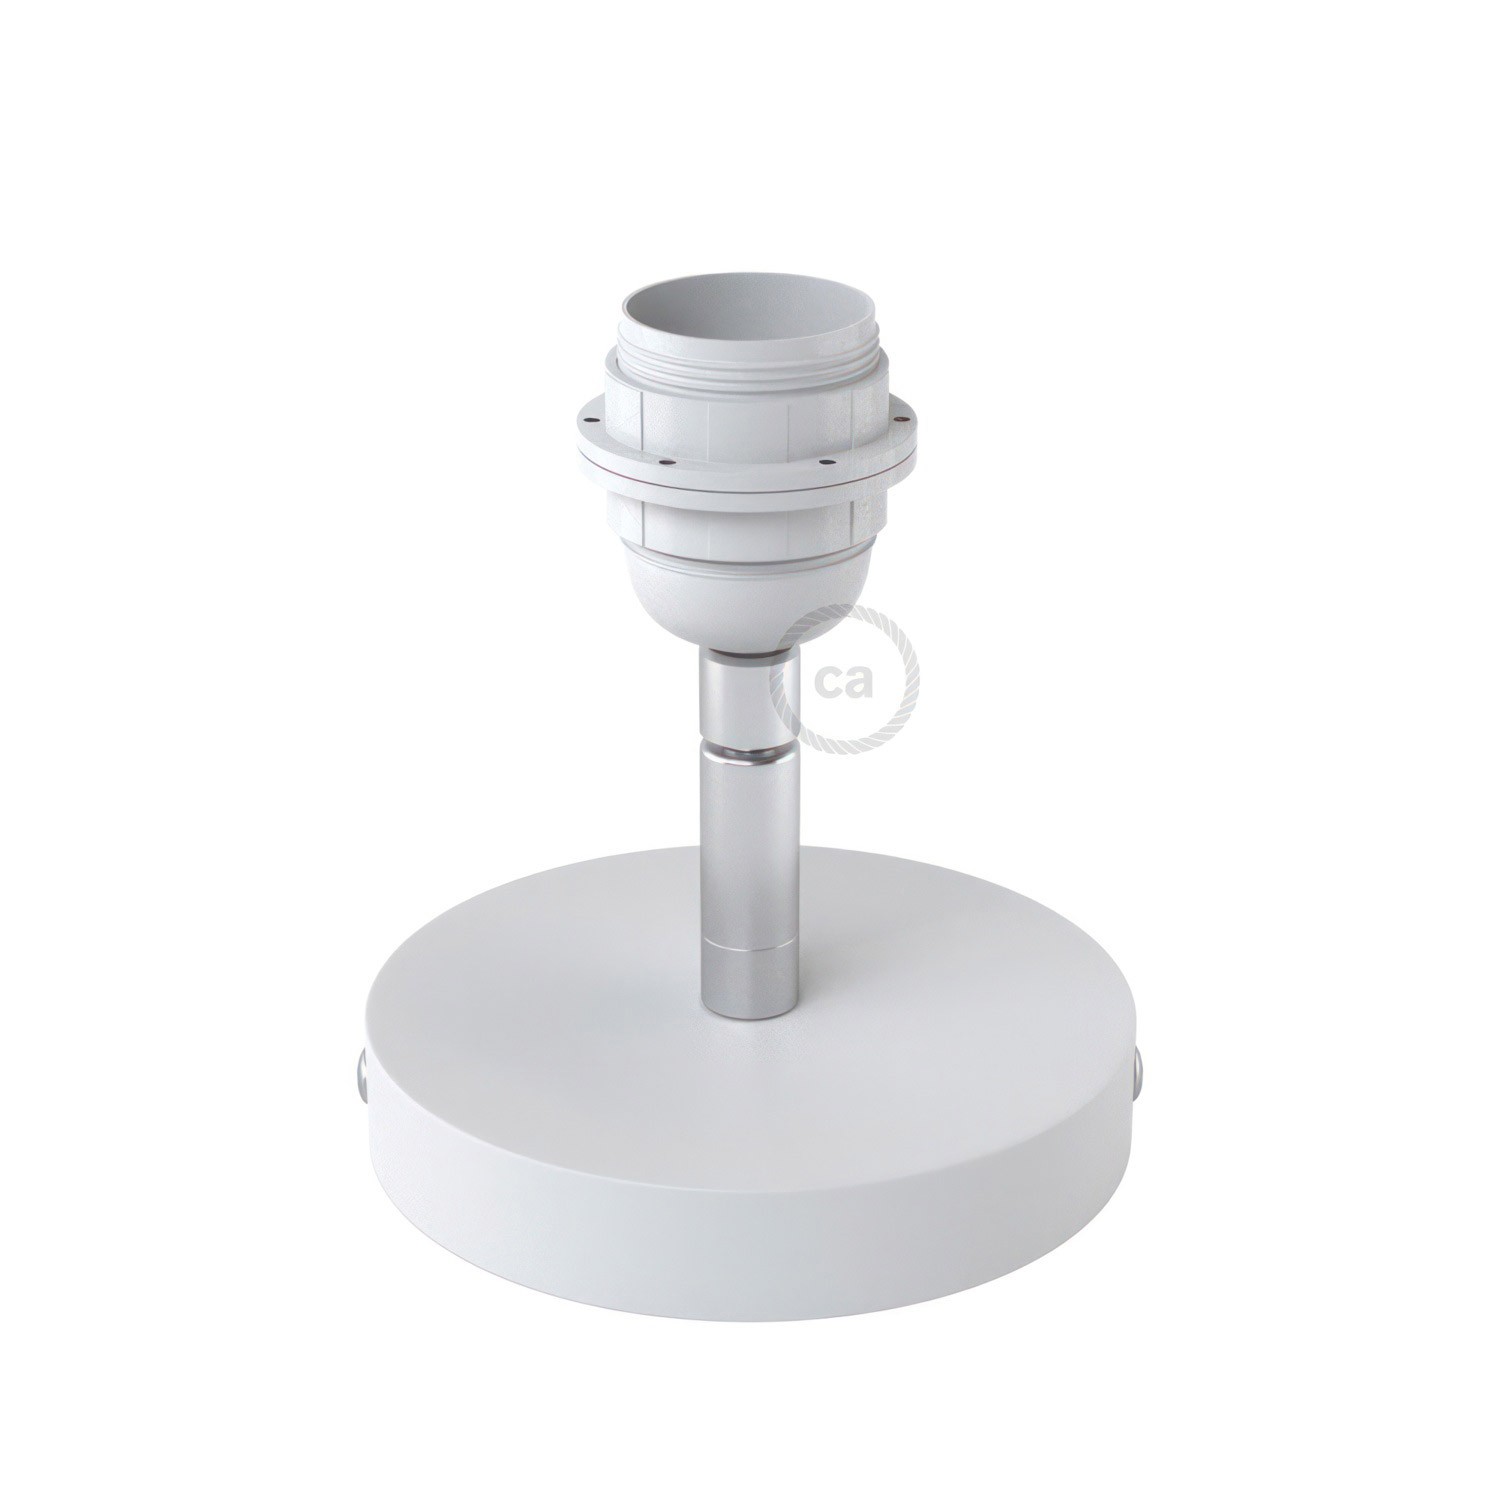 Fermaluce Metal 90°, the adjustable wall or ceiling light source E27 threaded lamp holder